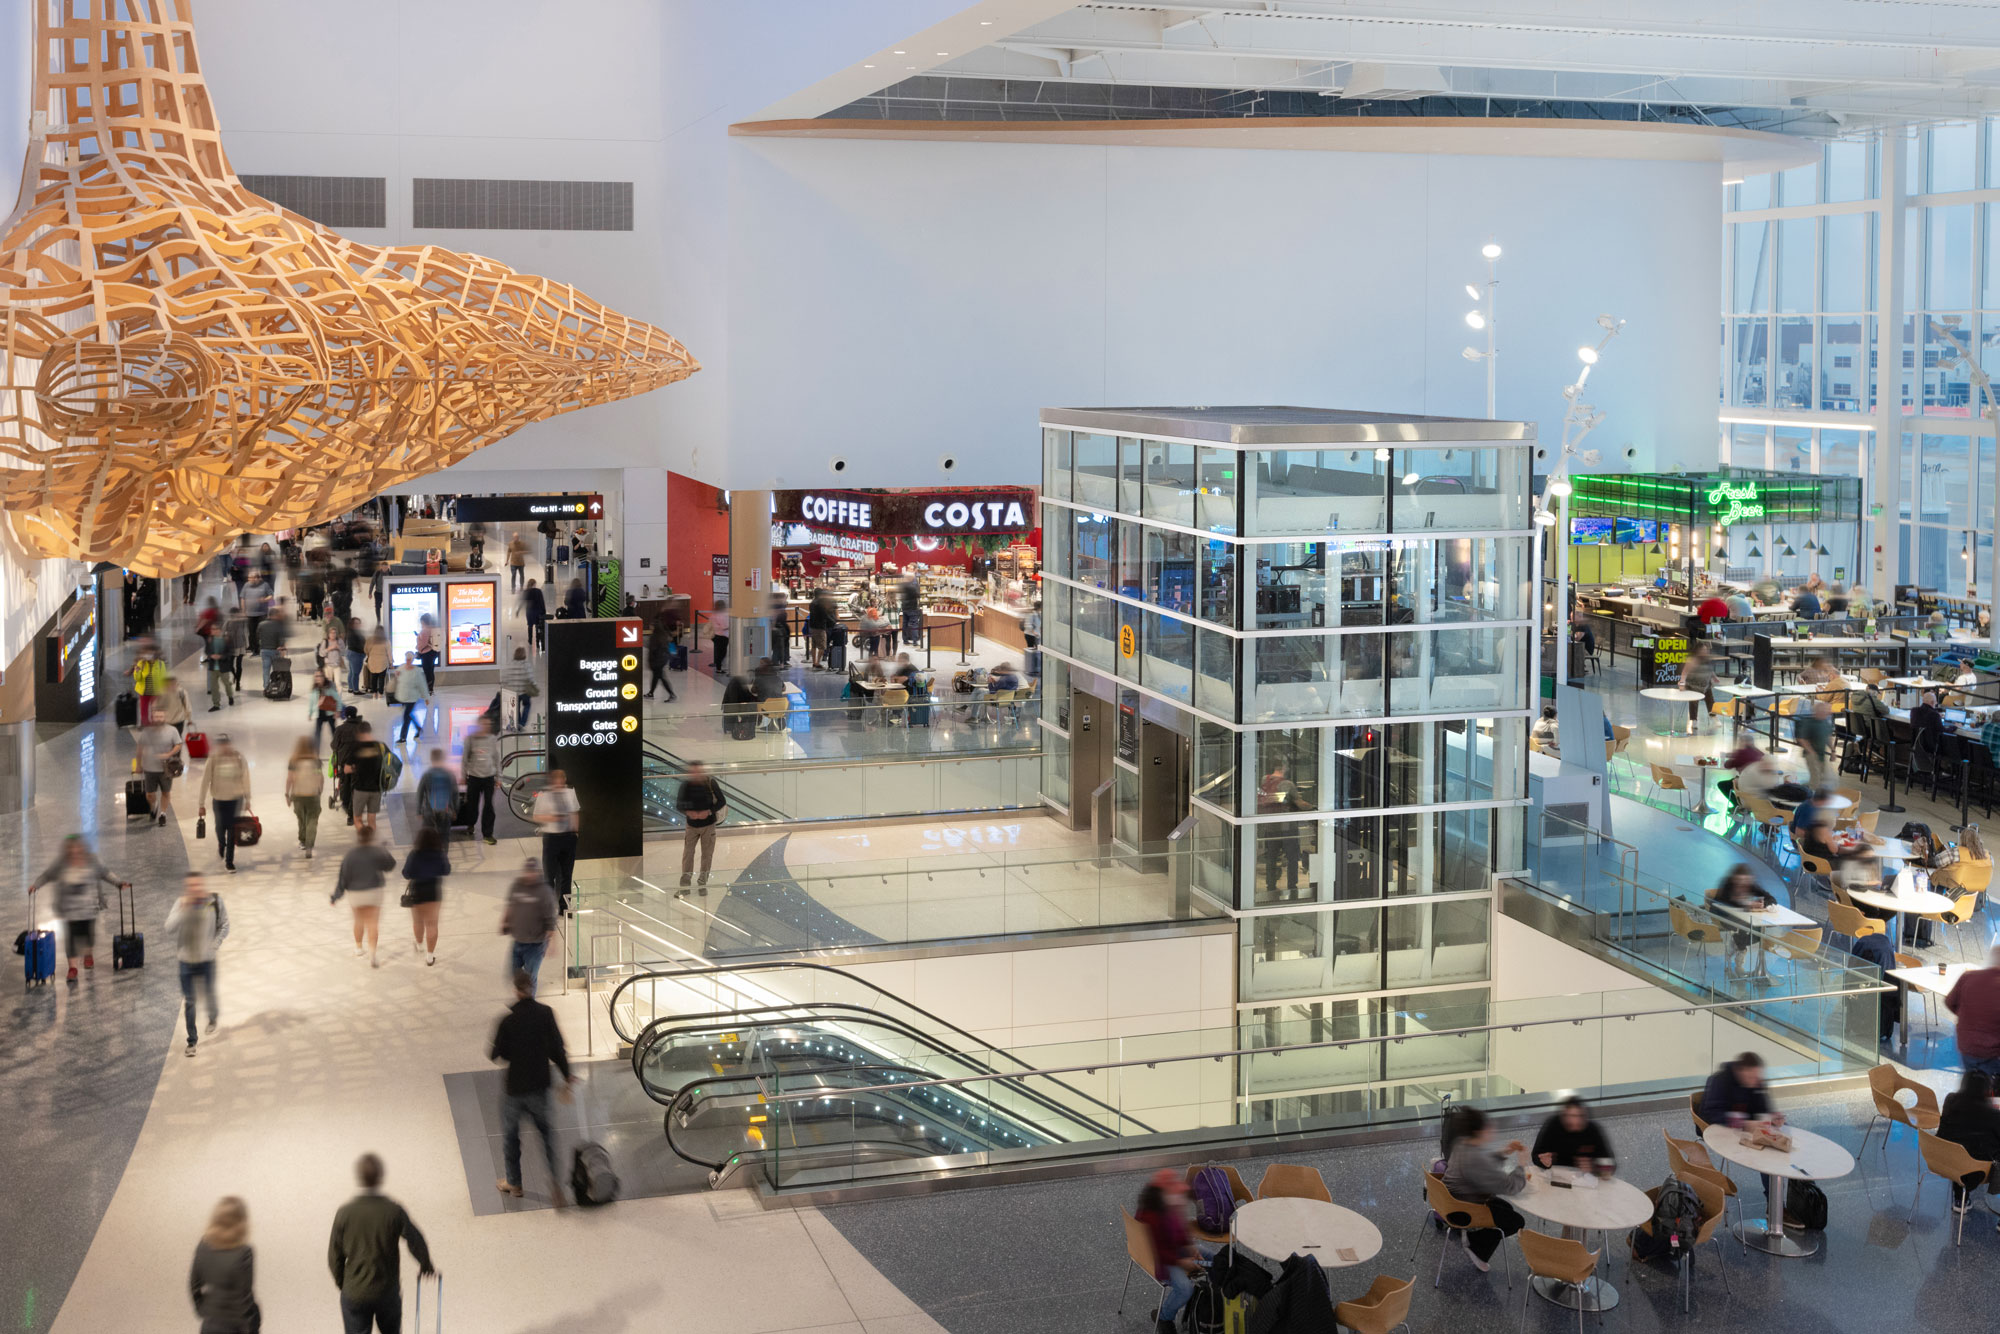 SEA North Concourse seating area looking at Costa Coffee and elevators